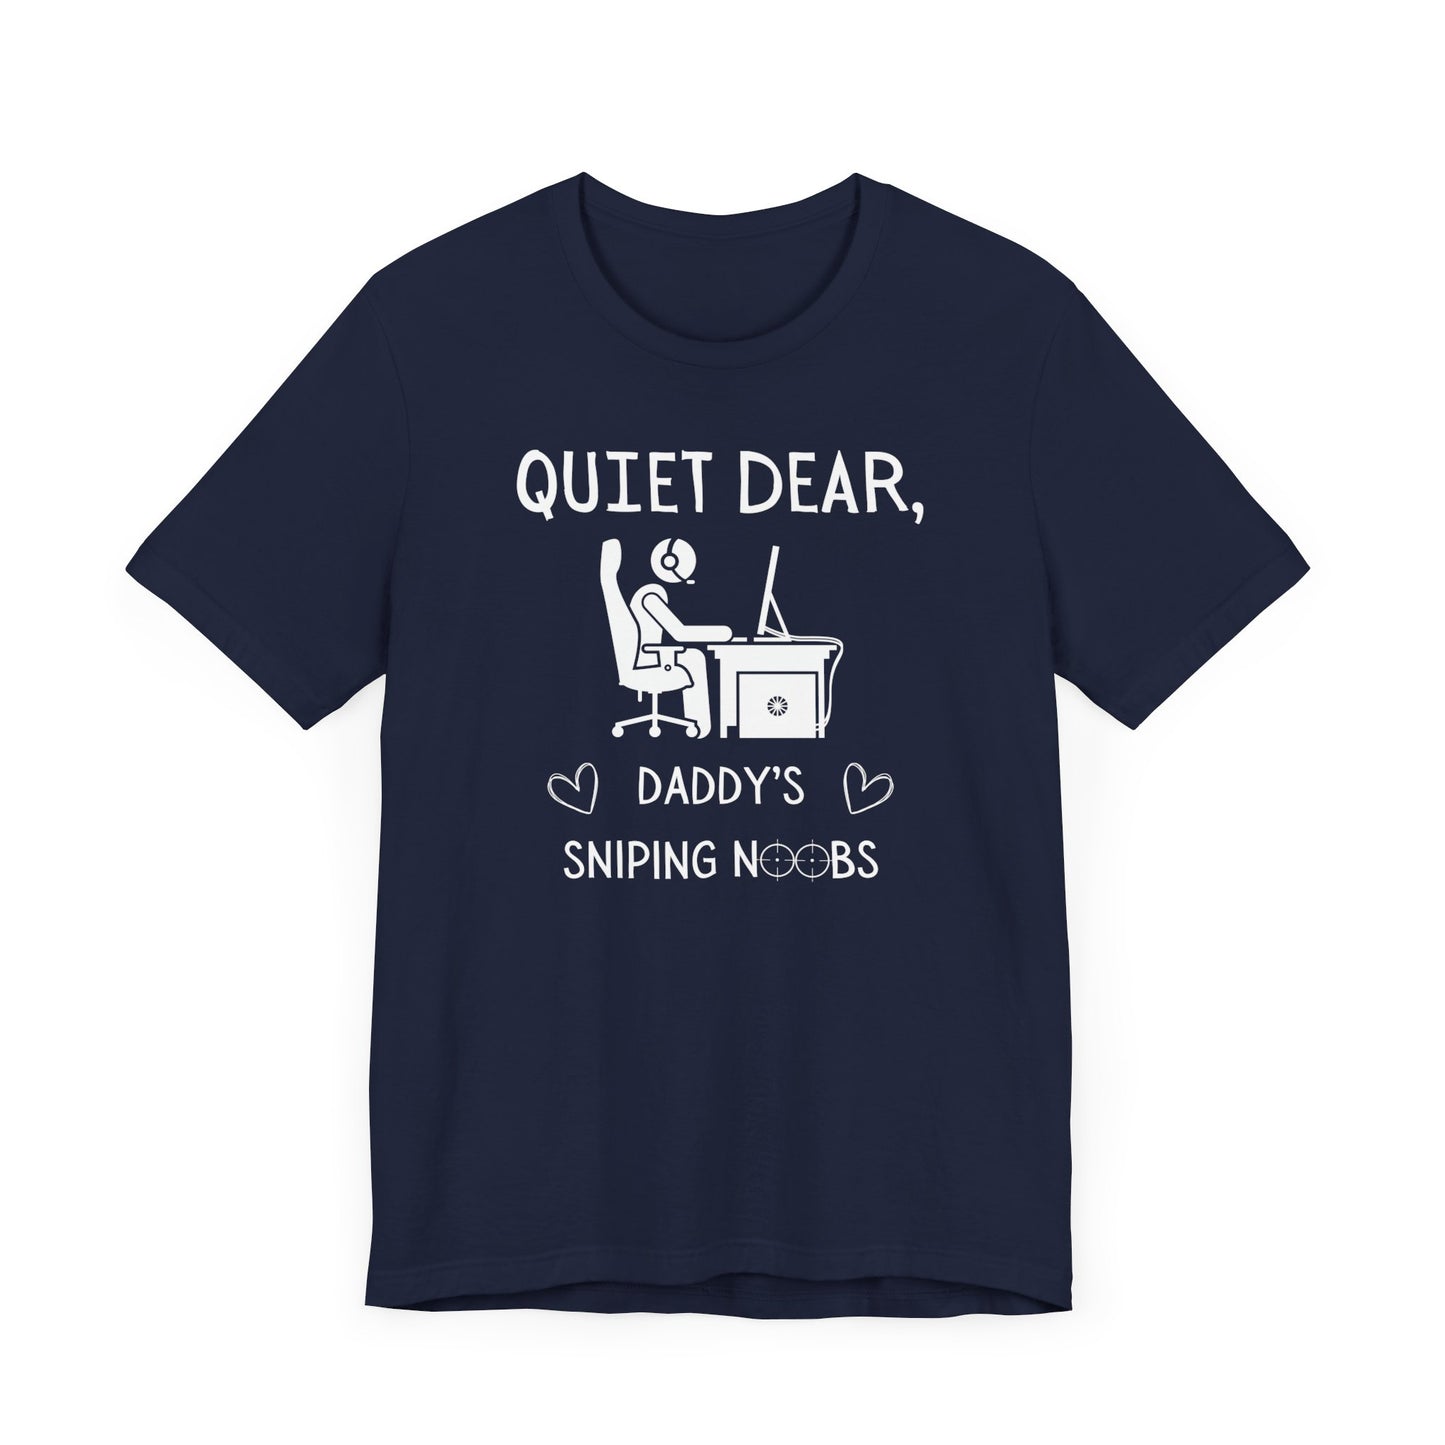 A flat image of a navy t-shirt that reads Quiet Dear, Daddy's Sniping Noobs in white text. The lower text is framed by two hearts, and the O's are in the shape of sniper scopes. In the center of the shirt is an image of a person at a desk with a gaming PC.